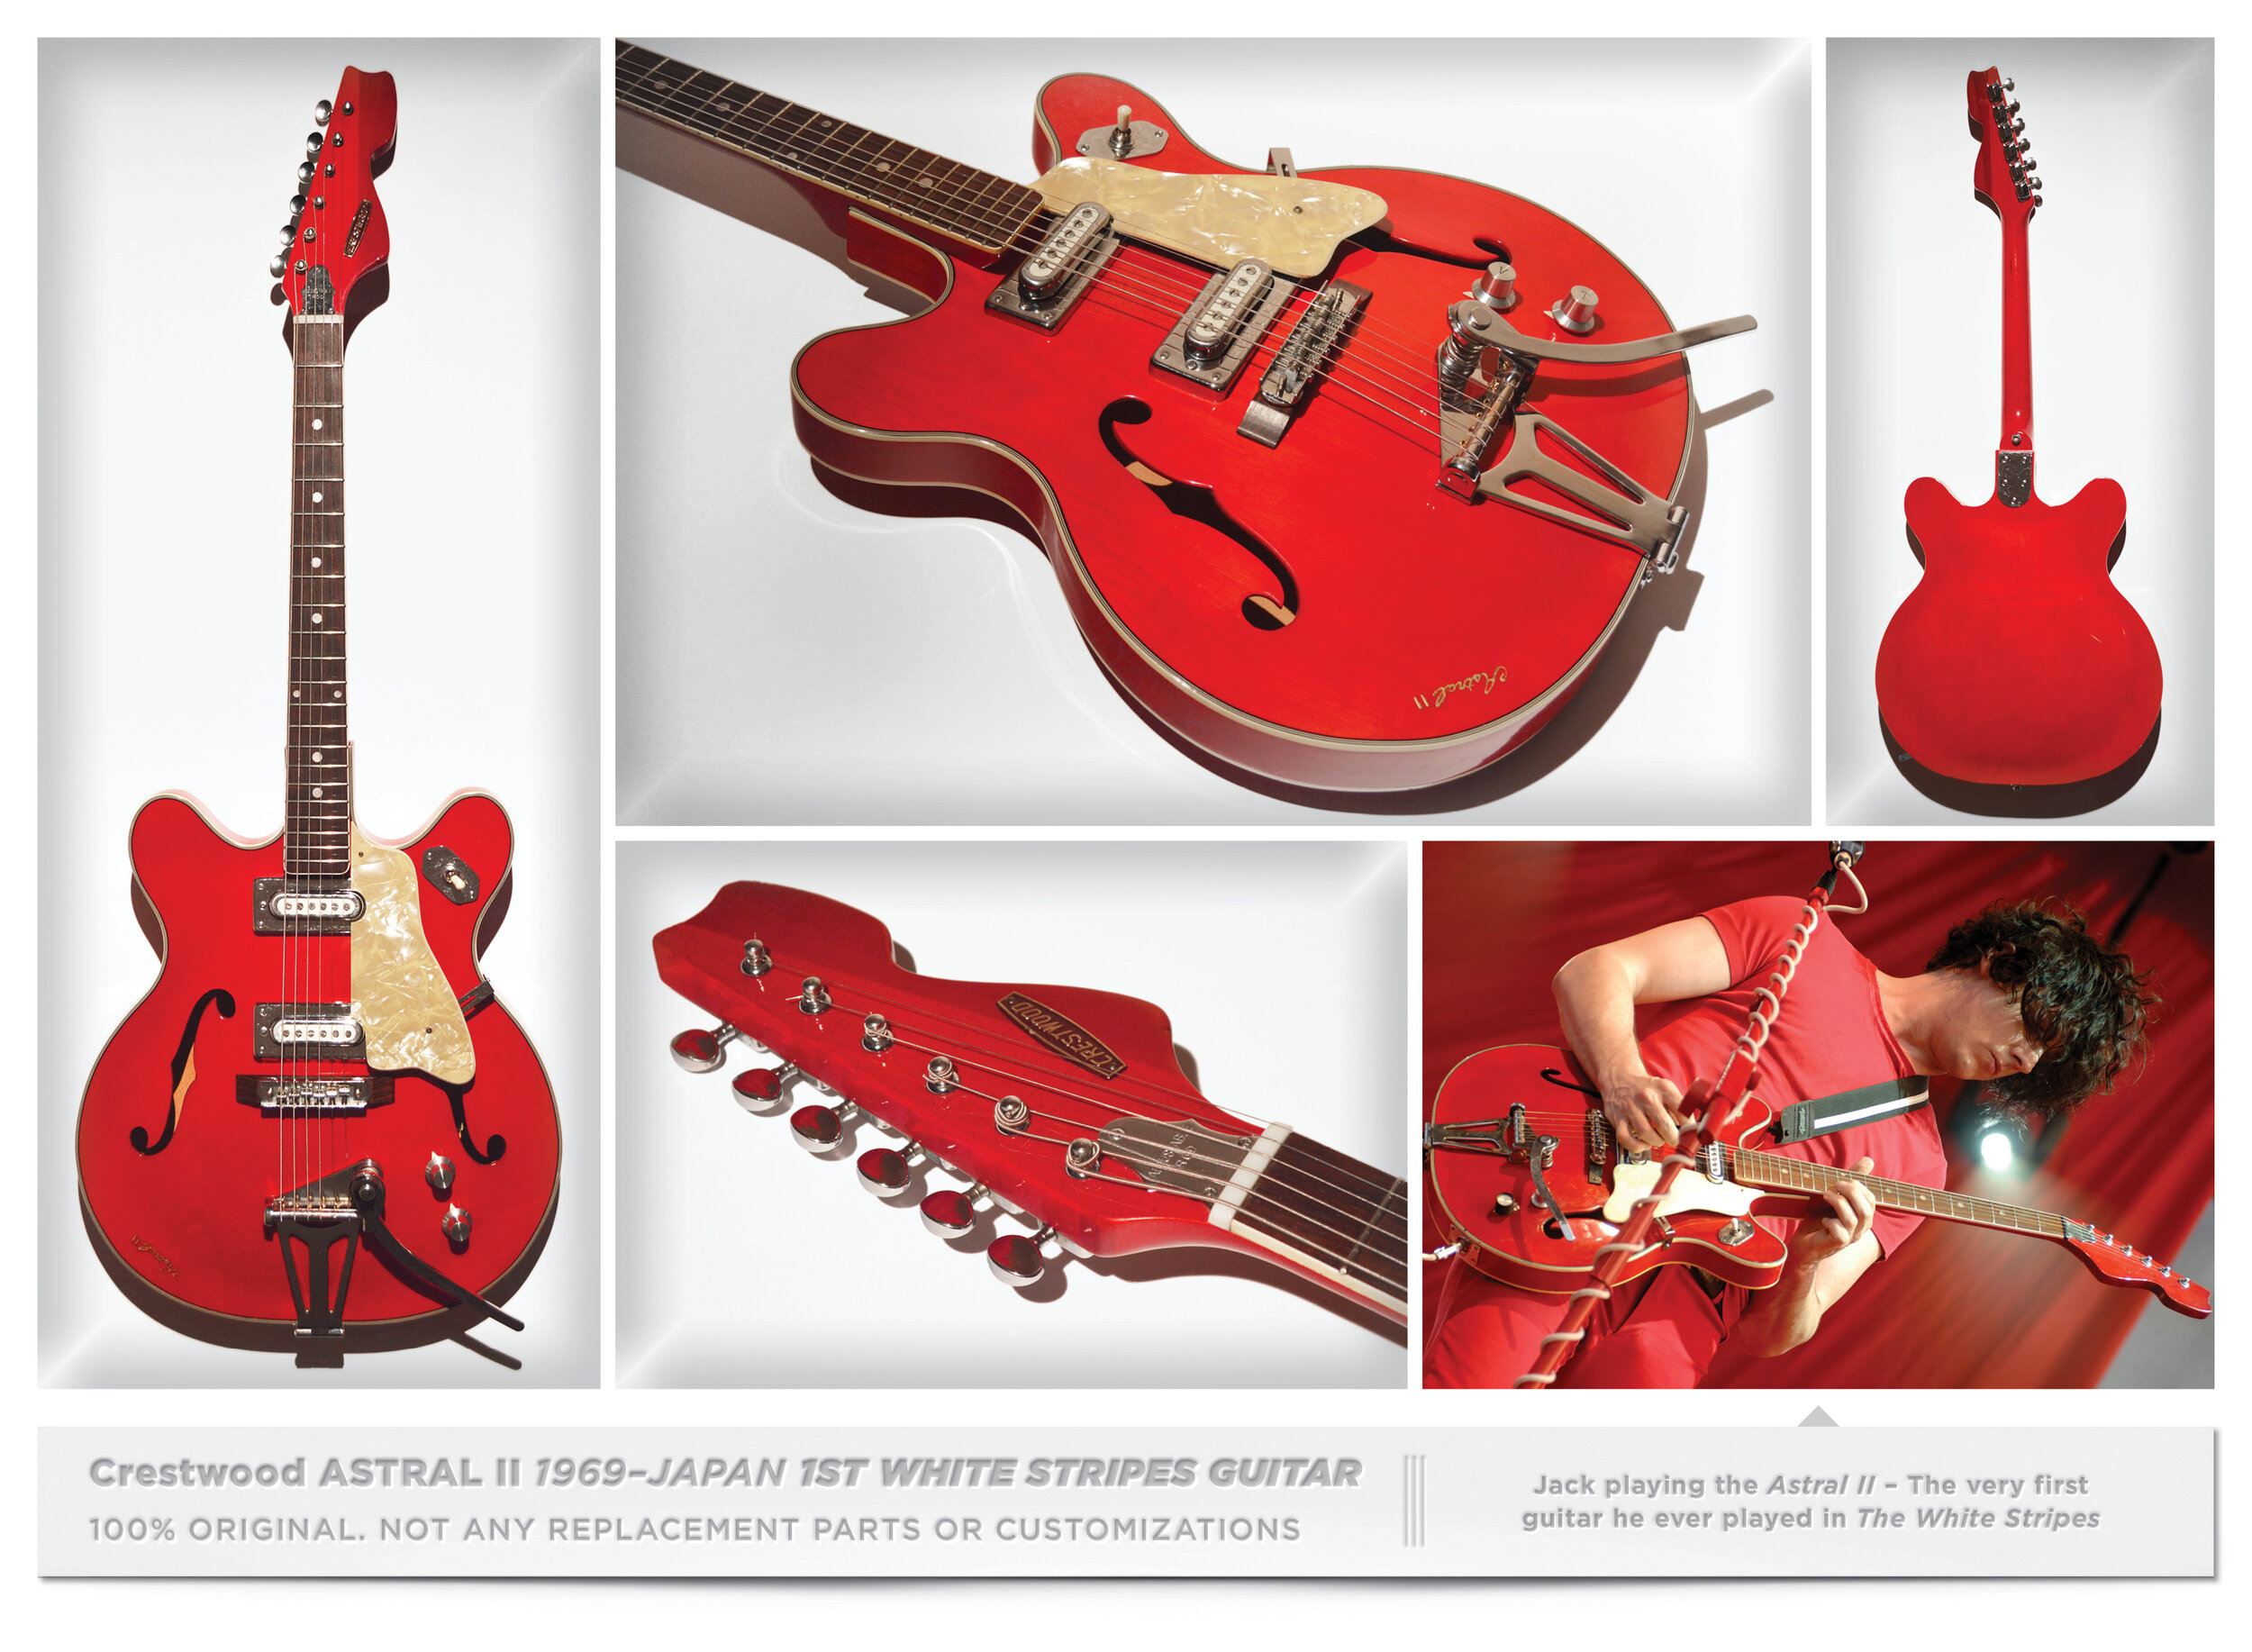 1 Crestwood ASTRAL II 1969–JAPAN 1ST WHITE STRIPES GUITAR THE JACK WHITE GUITAR COLLECTION FINAL LAYOUT.jpg